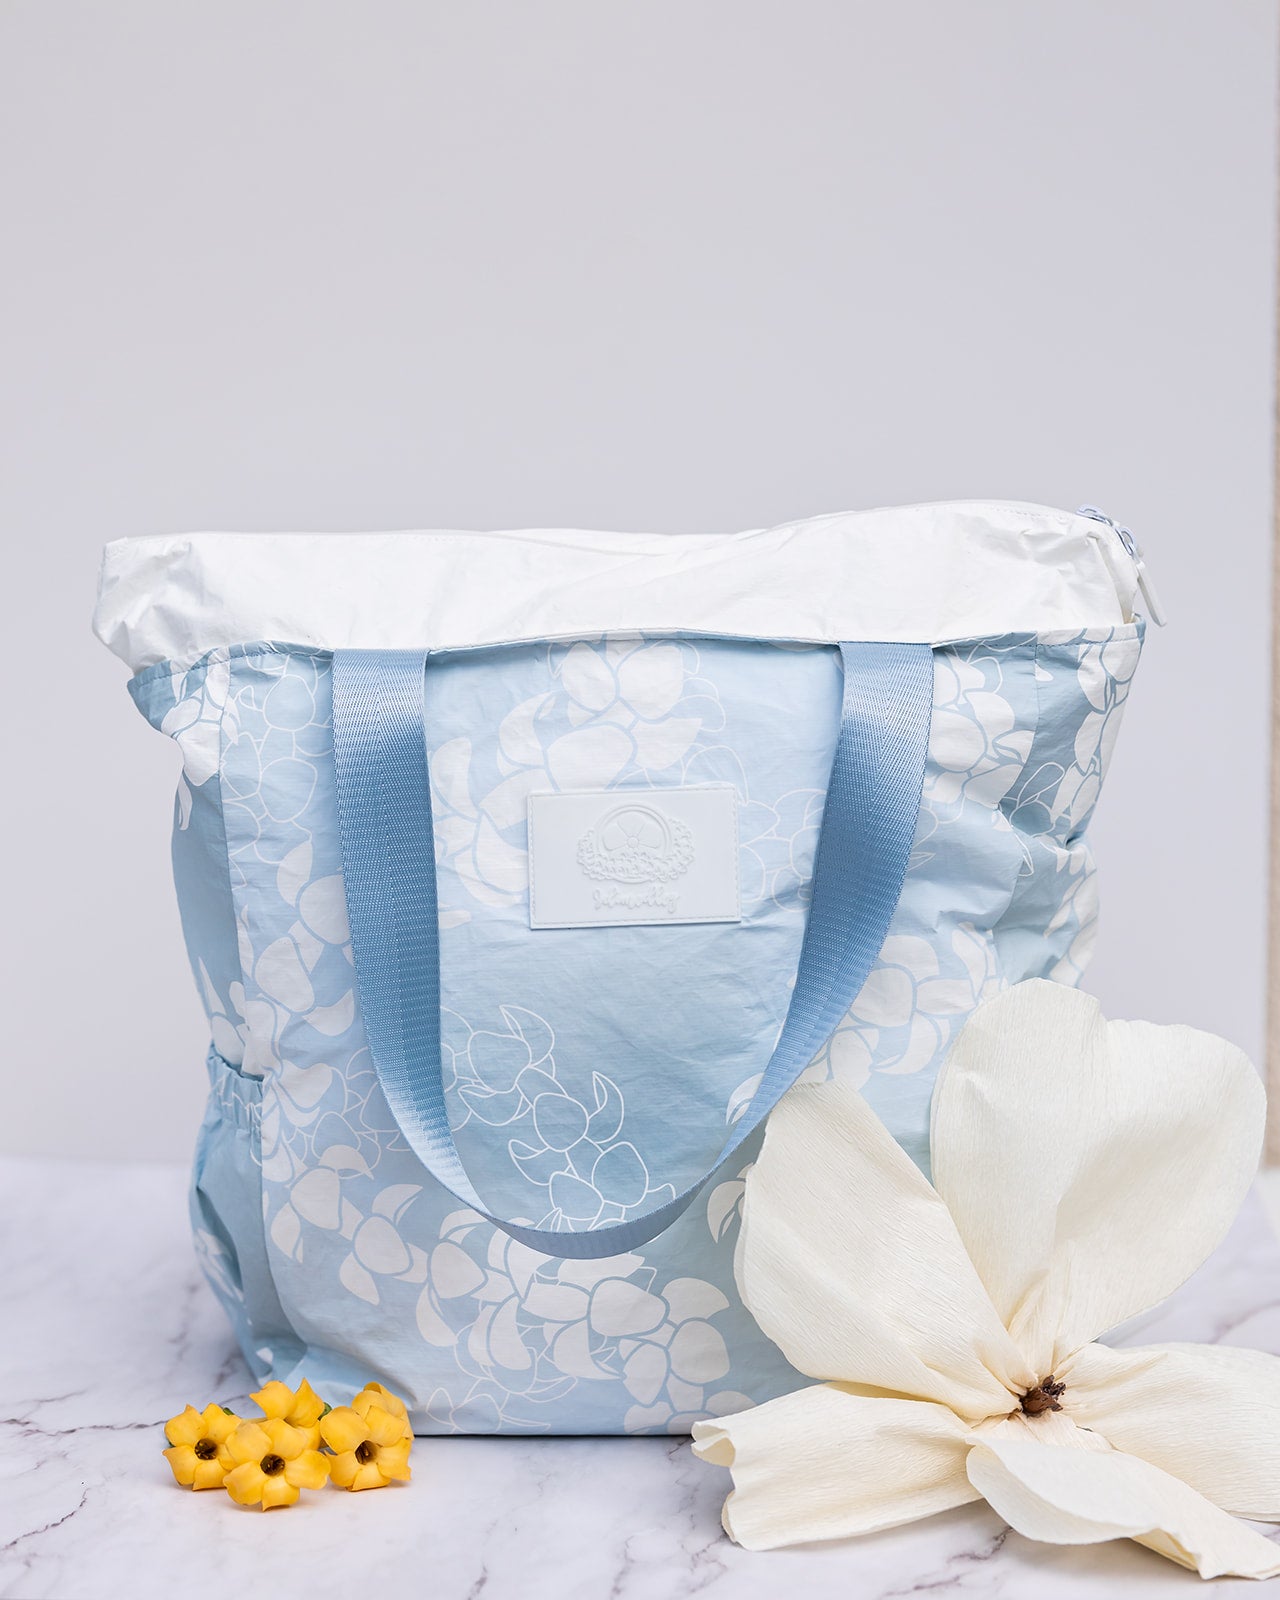 Light blue puakenikeni lei tyvek tote showing expandable zippered top and wide, matching colored nylon straps. 